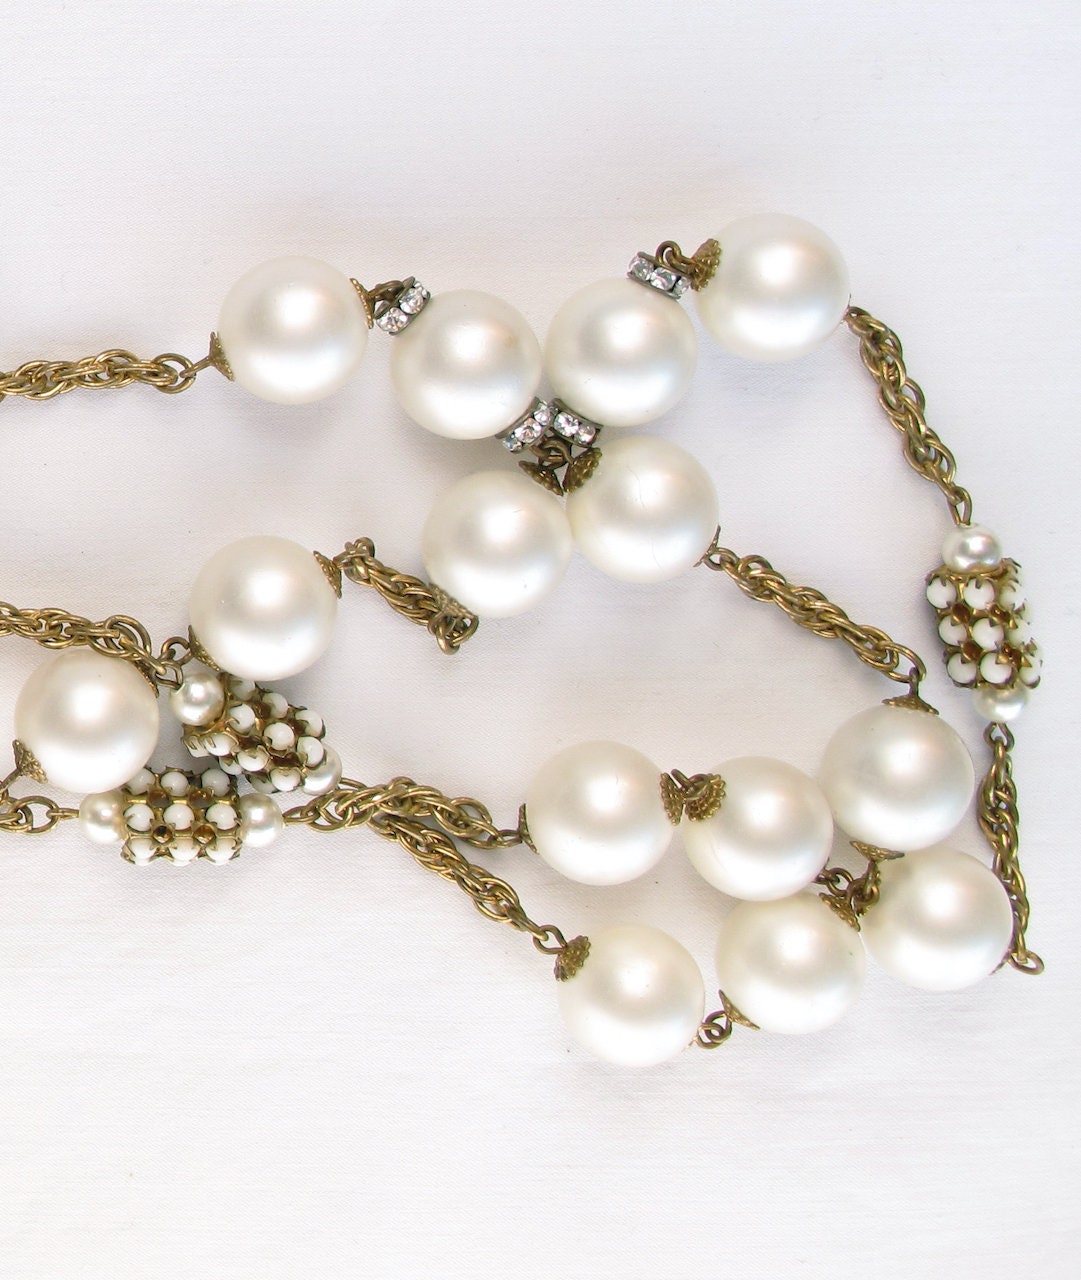 CHANEL Vintage '50s-'60s Large Pearl Choker Necklace